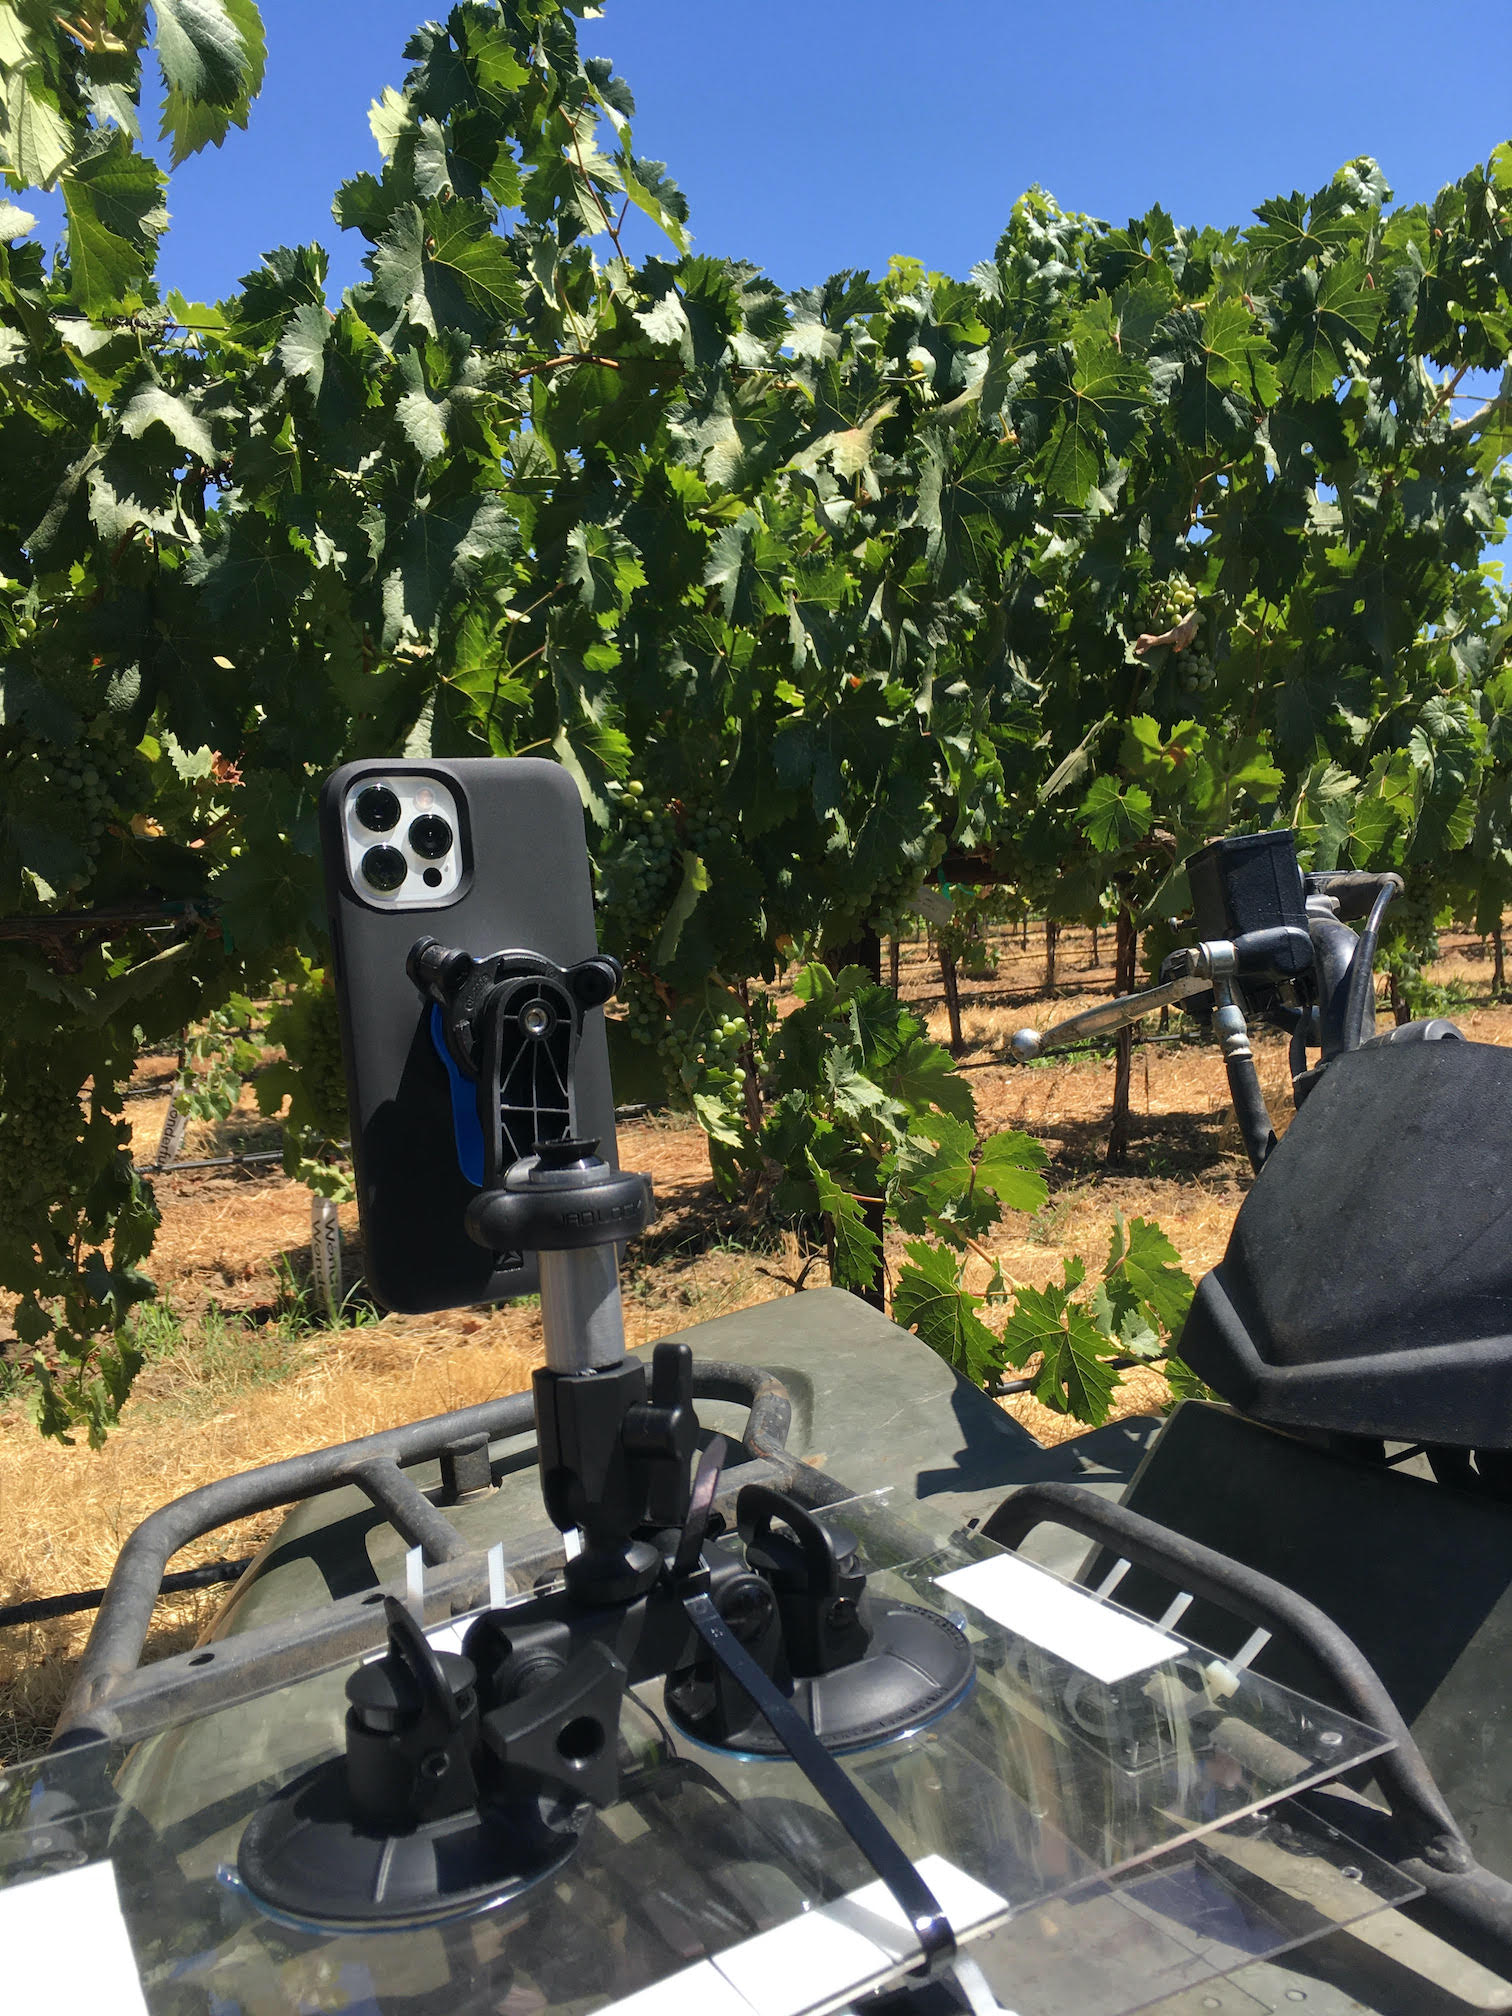 Rover Vision—Gather canopy moisture data from a whole vineyard with a quick ride on an ATV or tractor. 